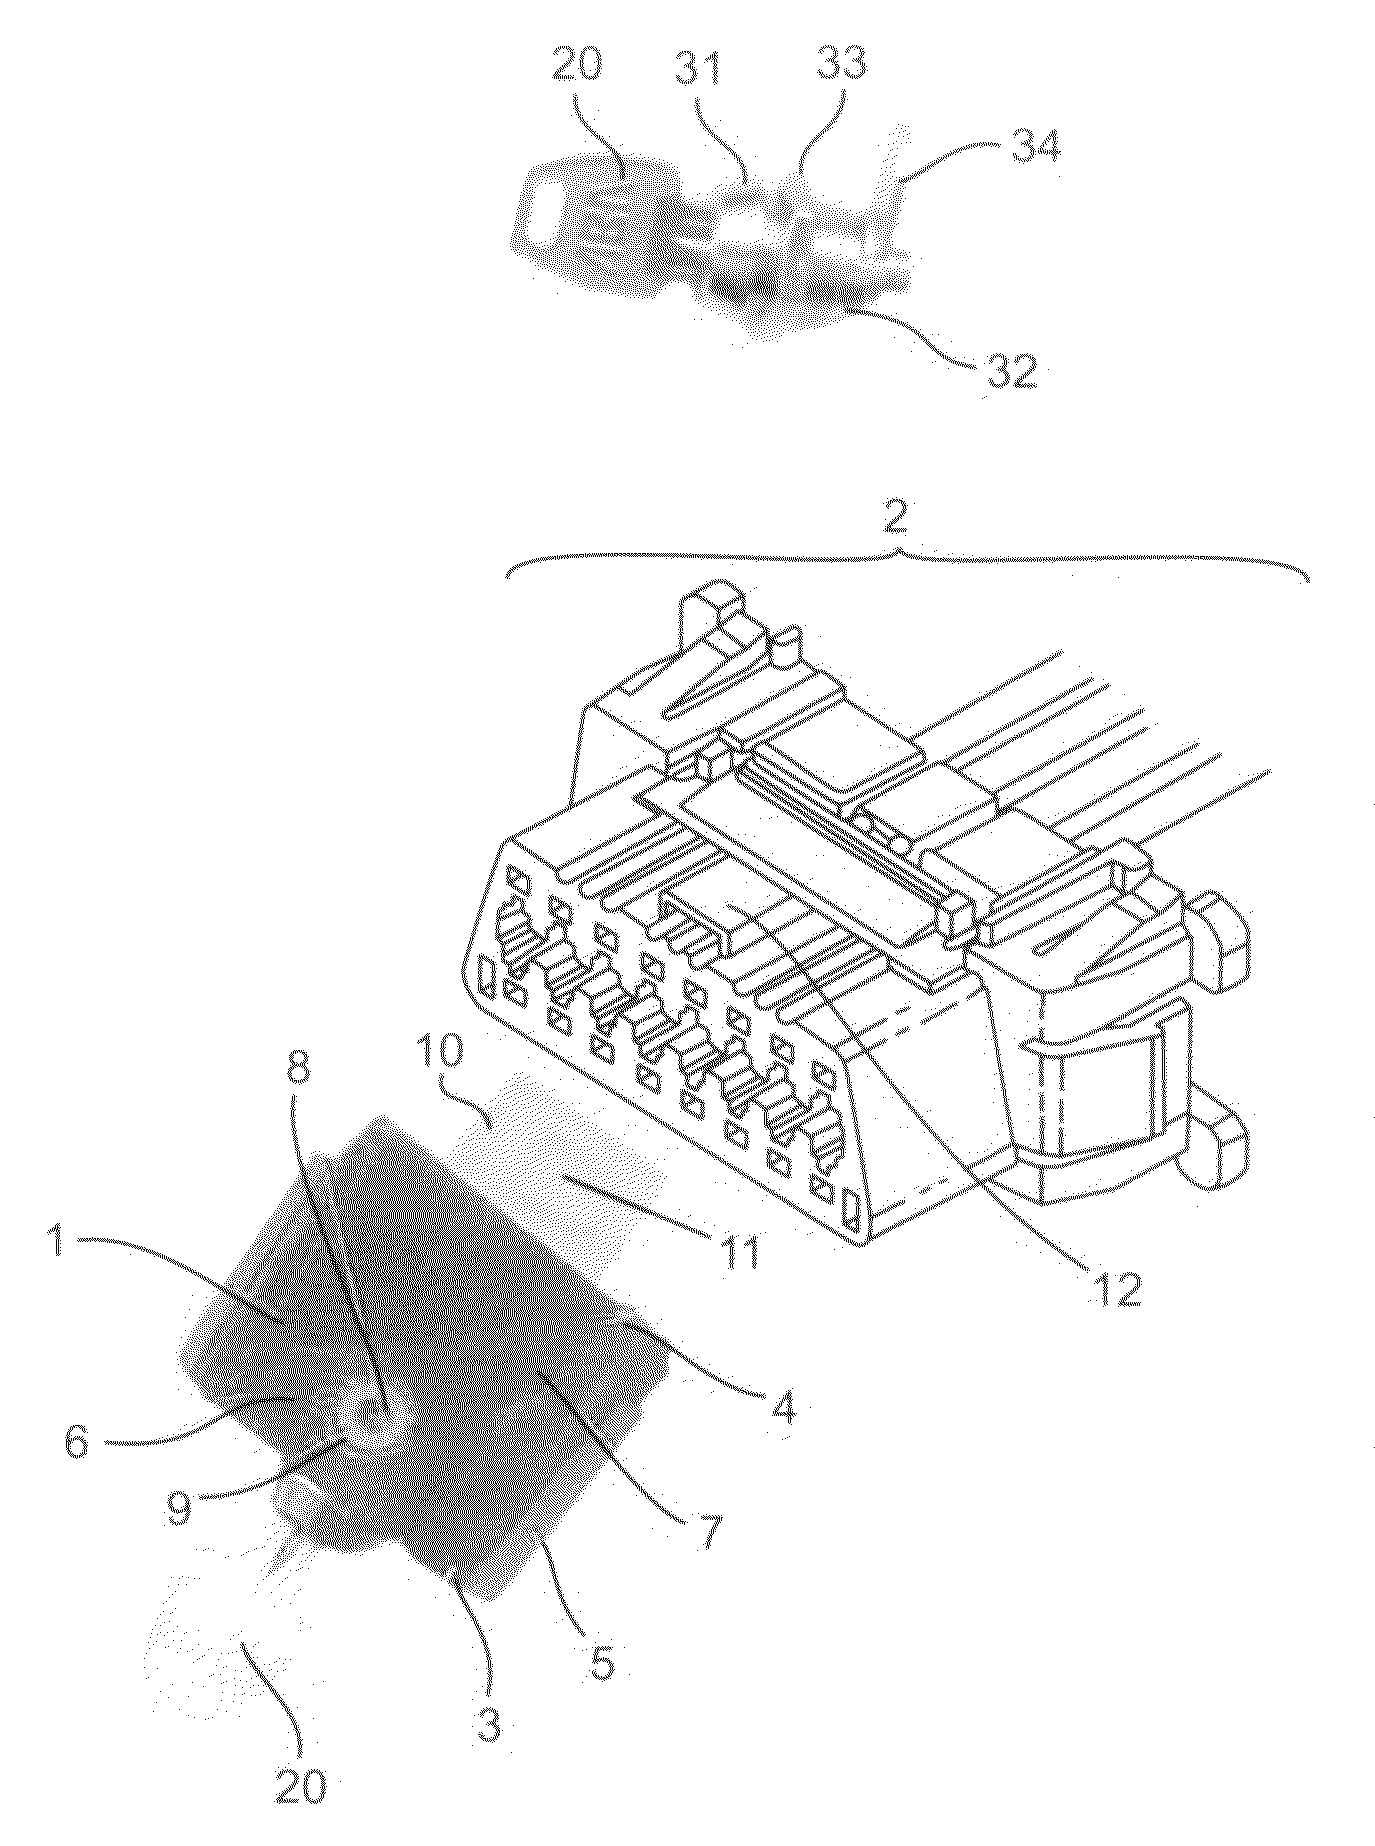 Vehicle connector lockout apparatus and method of using same